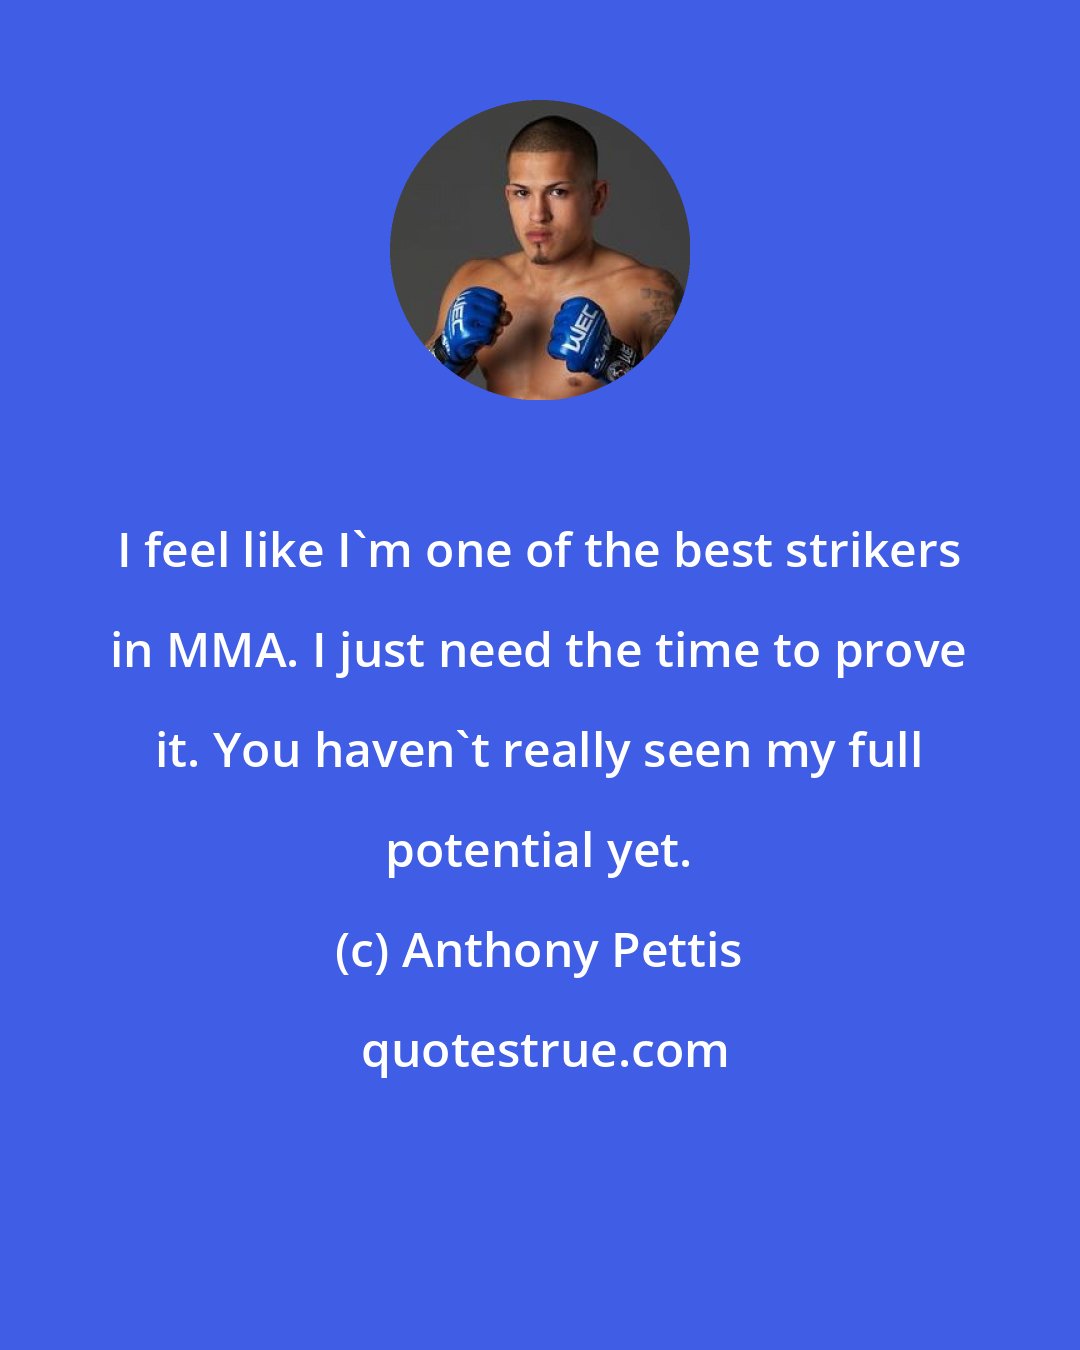 Anthony Pettis: I feel like I'm one of the best strikers in MMA. I just need the time to prove it. You haven't really seen my full potential yet.